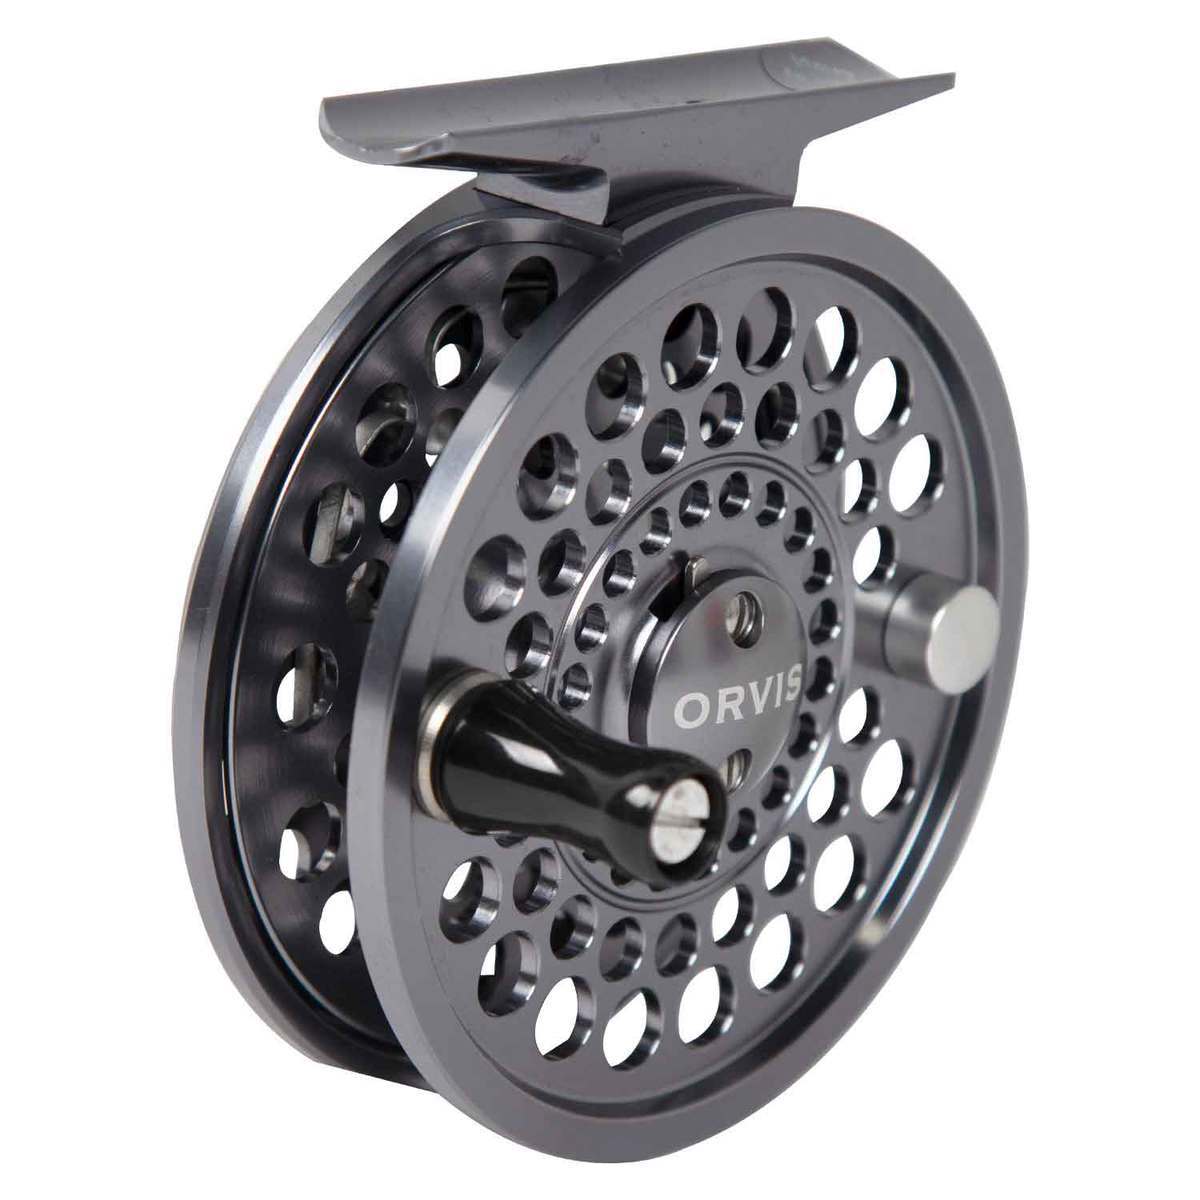 Fly Fishing Addict: Lamson Guru 2: New reel to replace the old